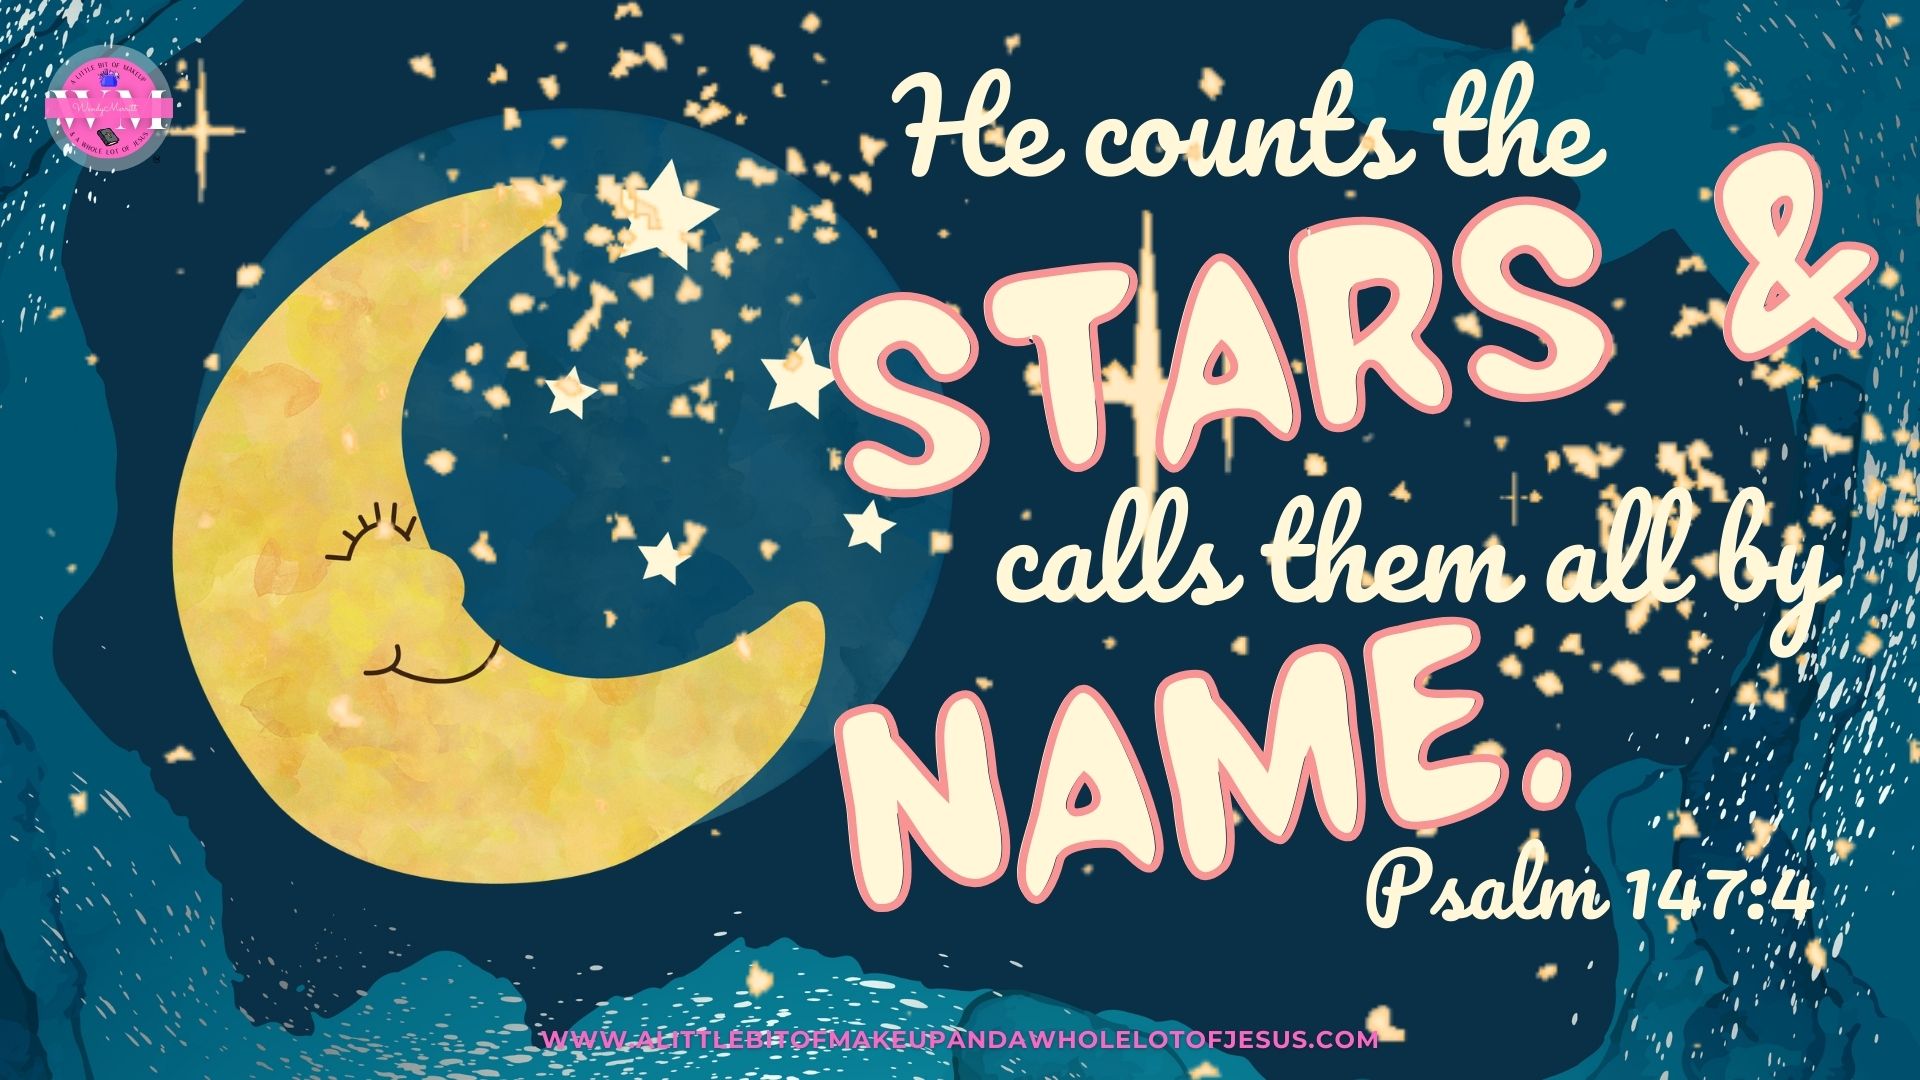 Graphics: He counts the stars & calls them all by name.  Psalm 147:4 Season 1: Episode 37